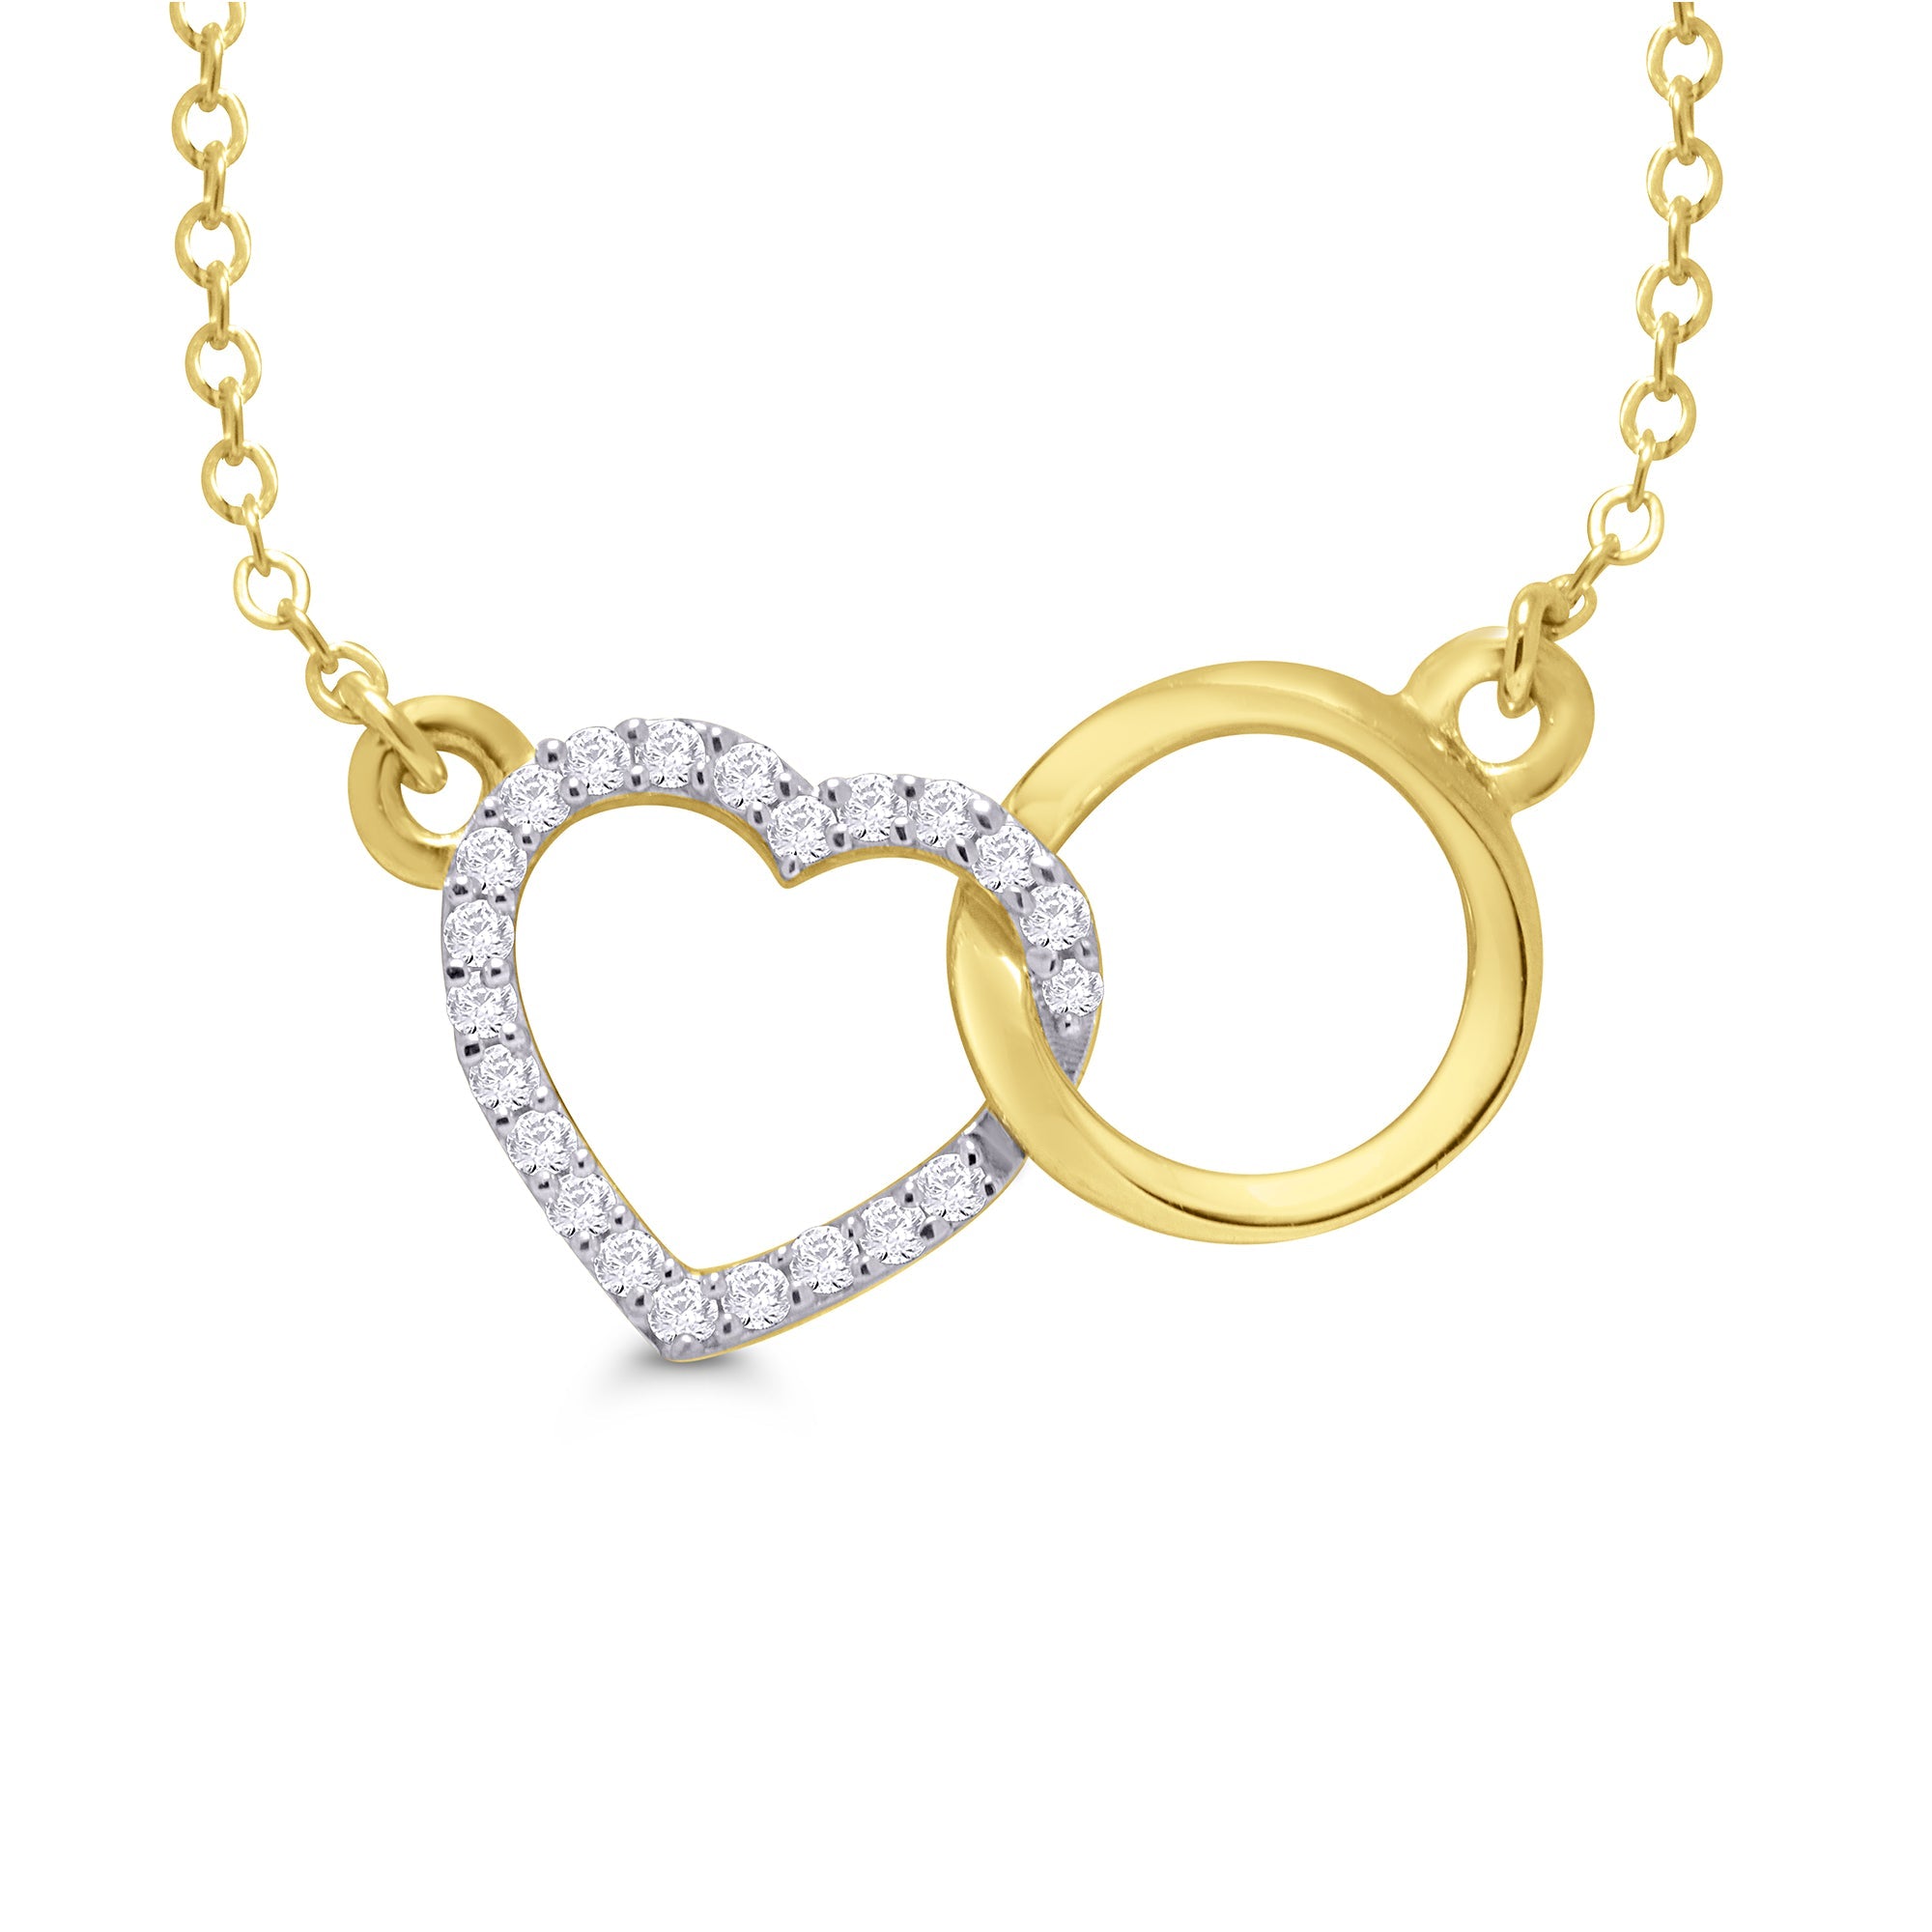 9ct gold diamond set heart & plain circle pendant with 18" chain (included) 0.11ct